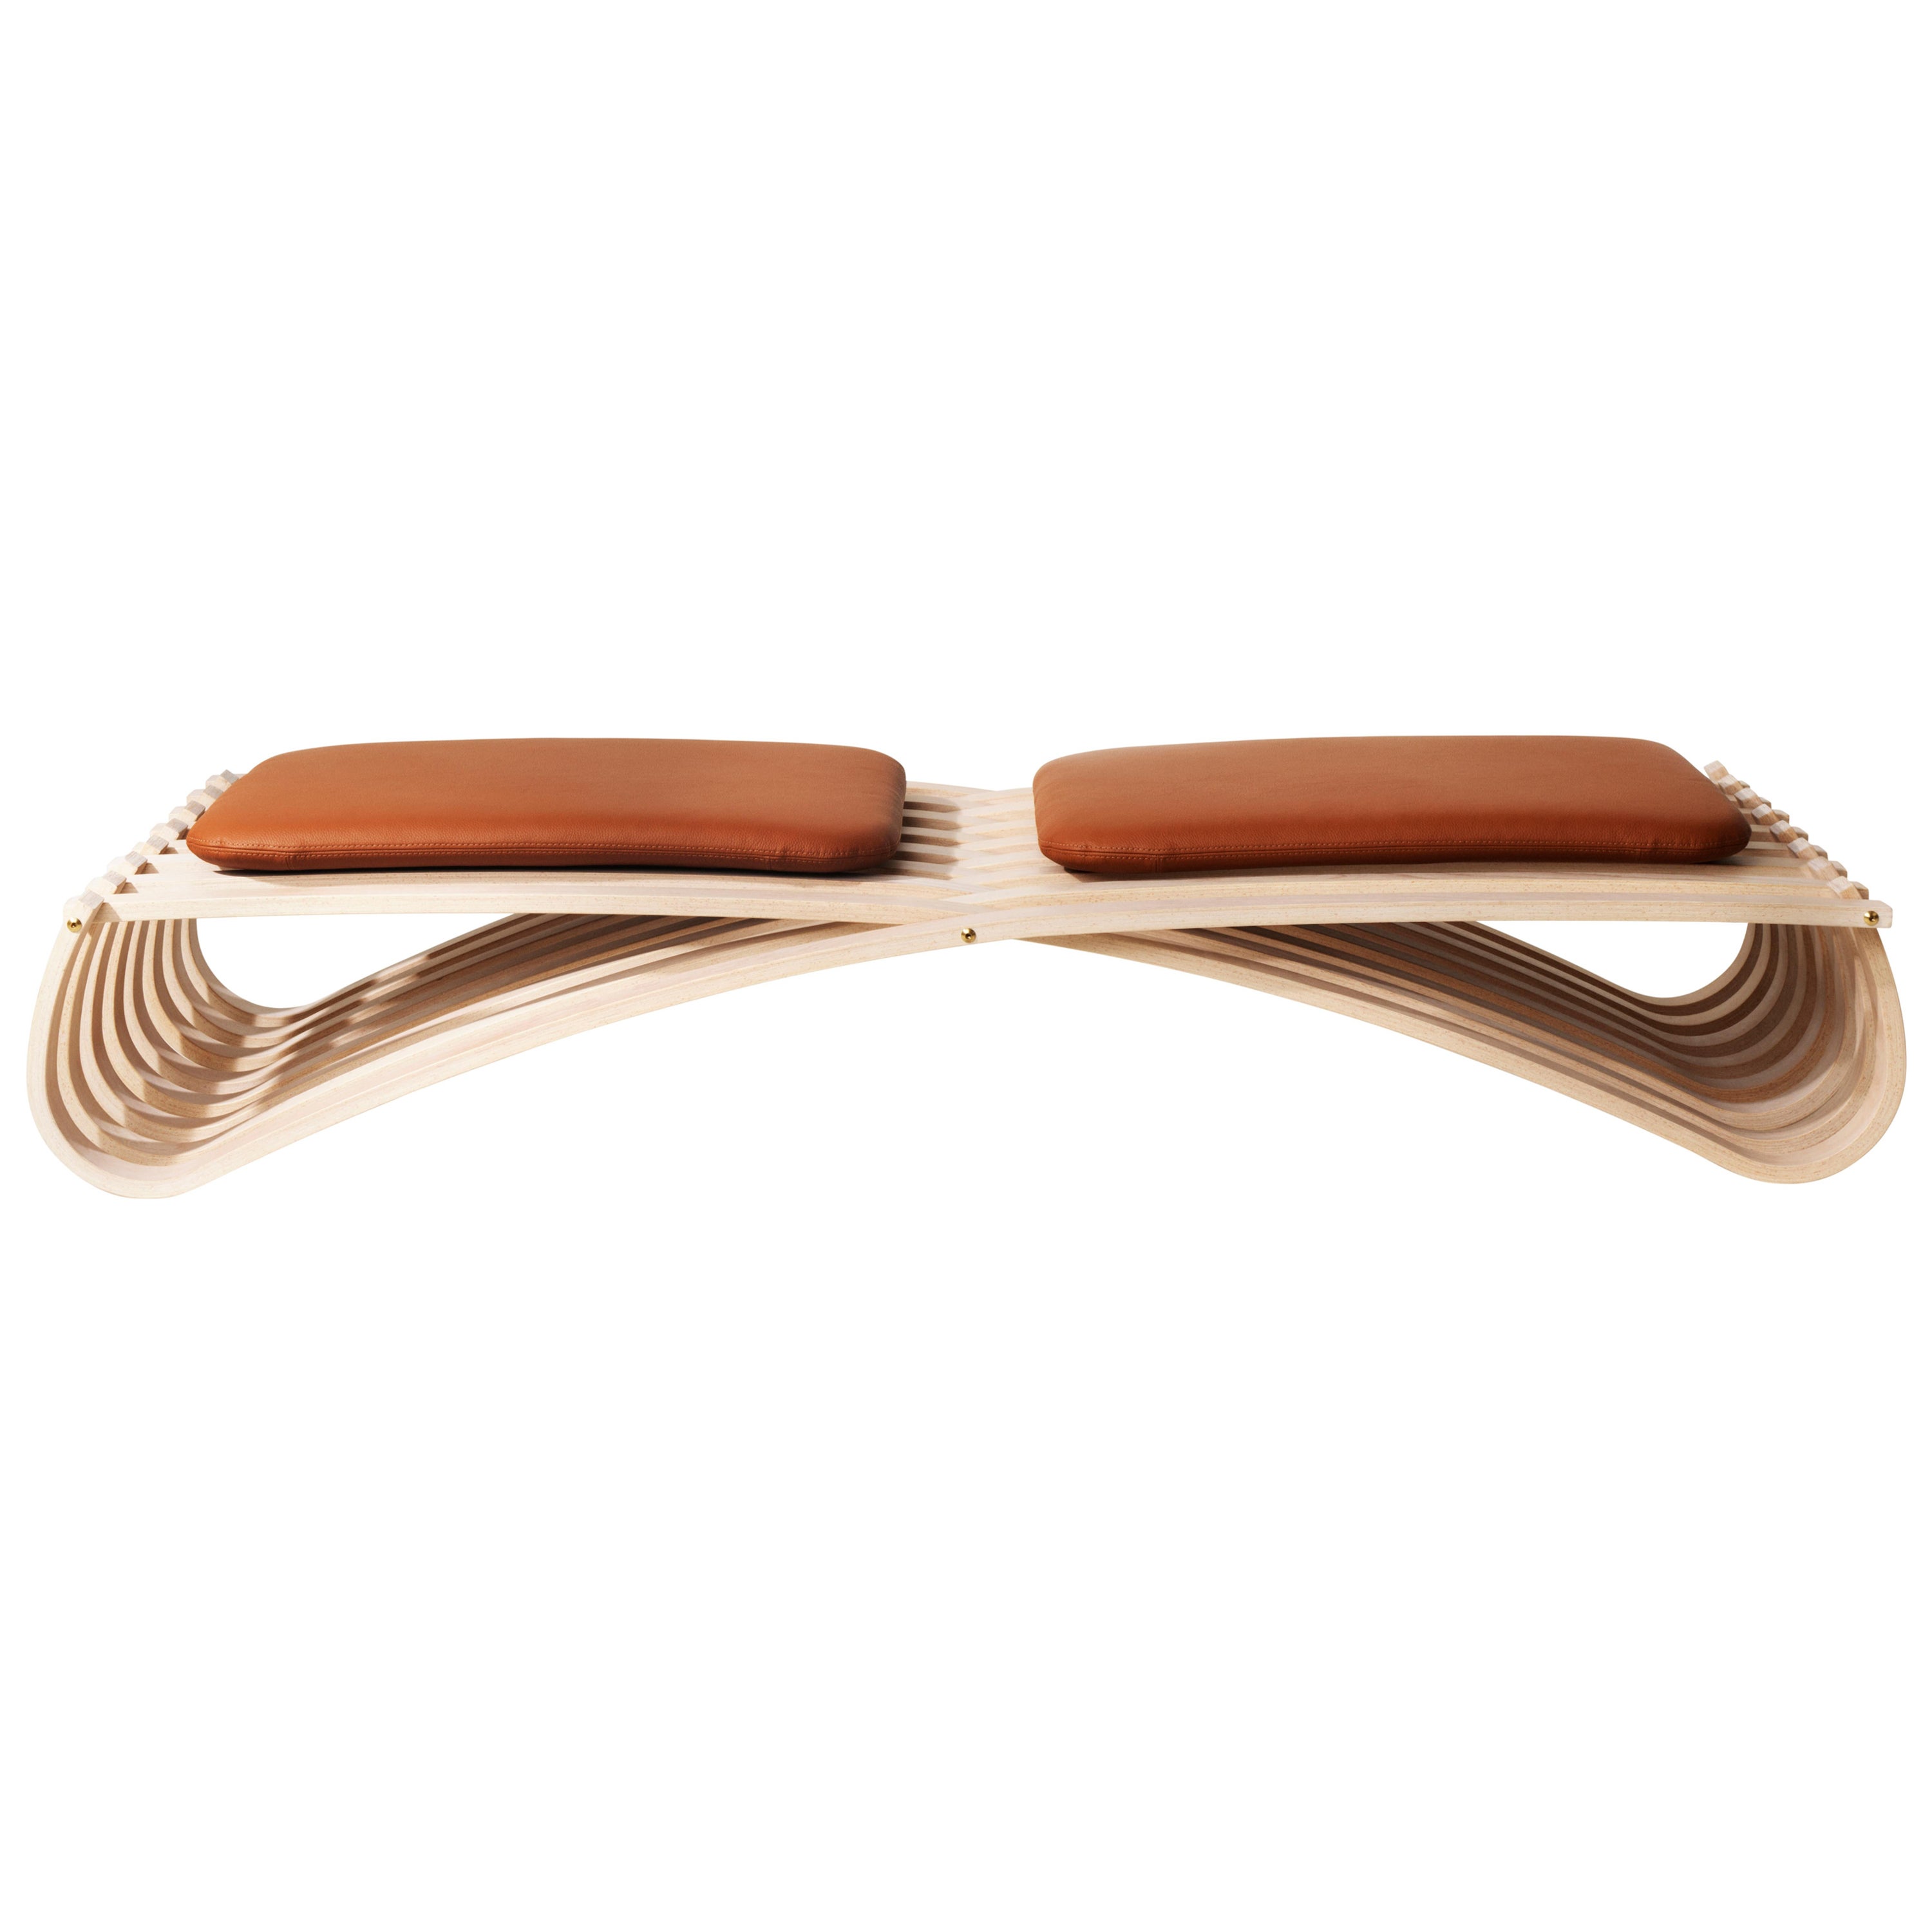 Jundo daybed in beech & cognac shades For Sale